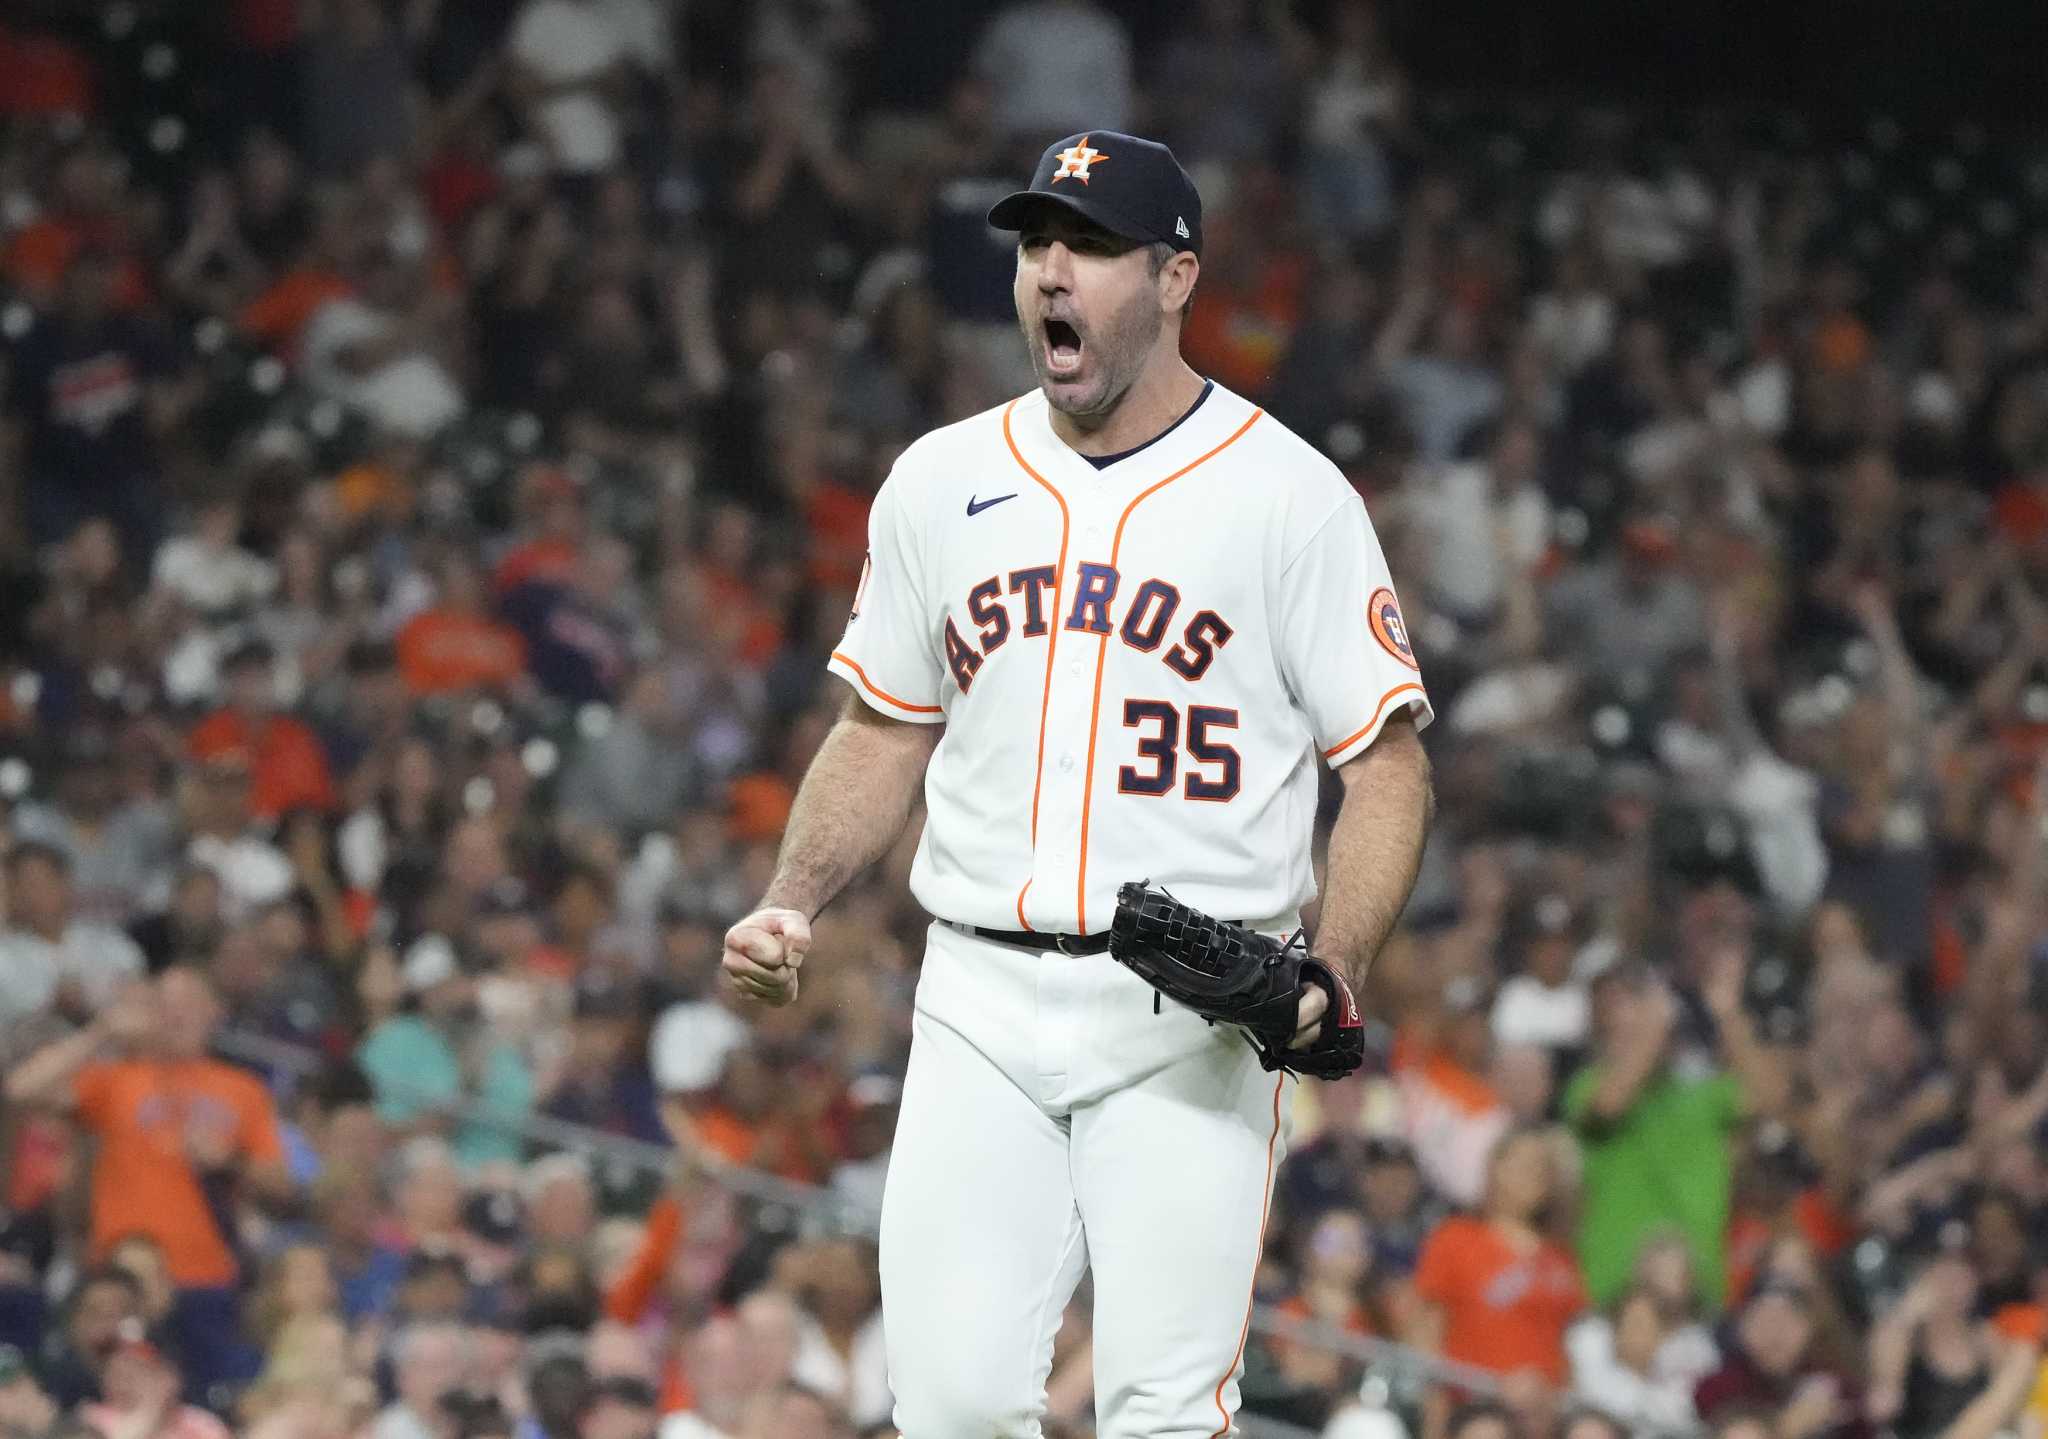 Astros ace Justin Verlander has chance to add to legacy in World Series -  The Japan Times